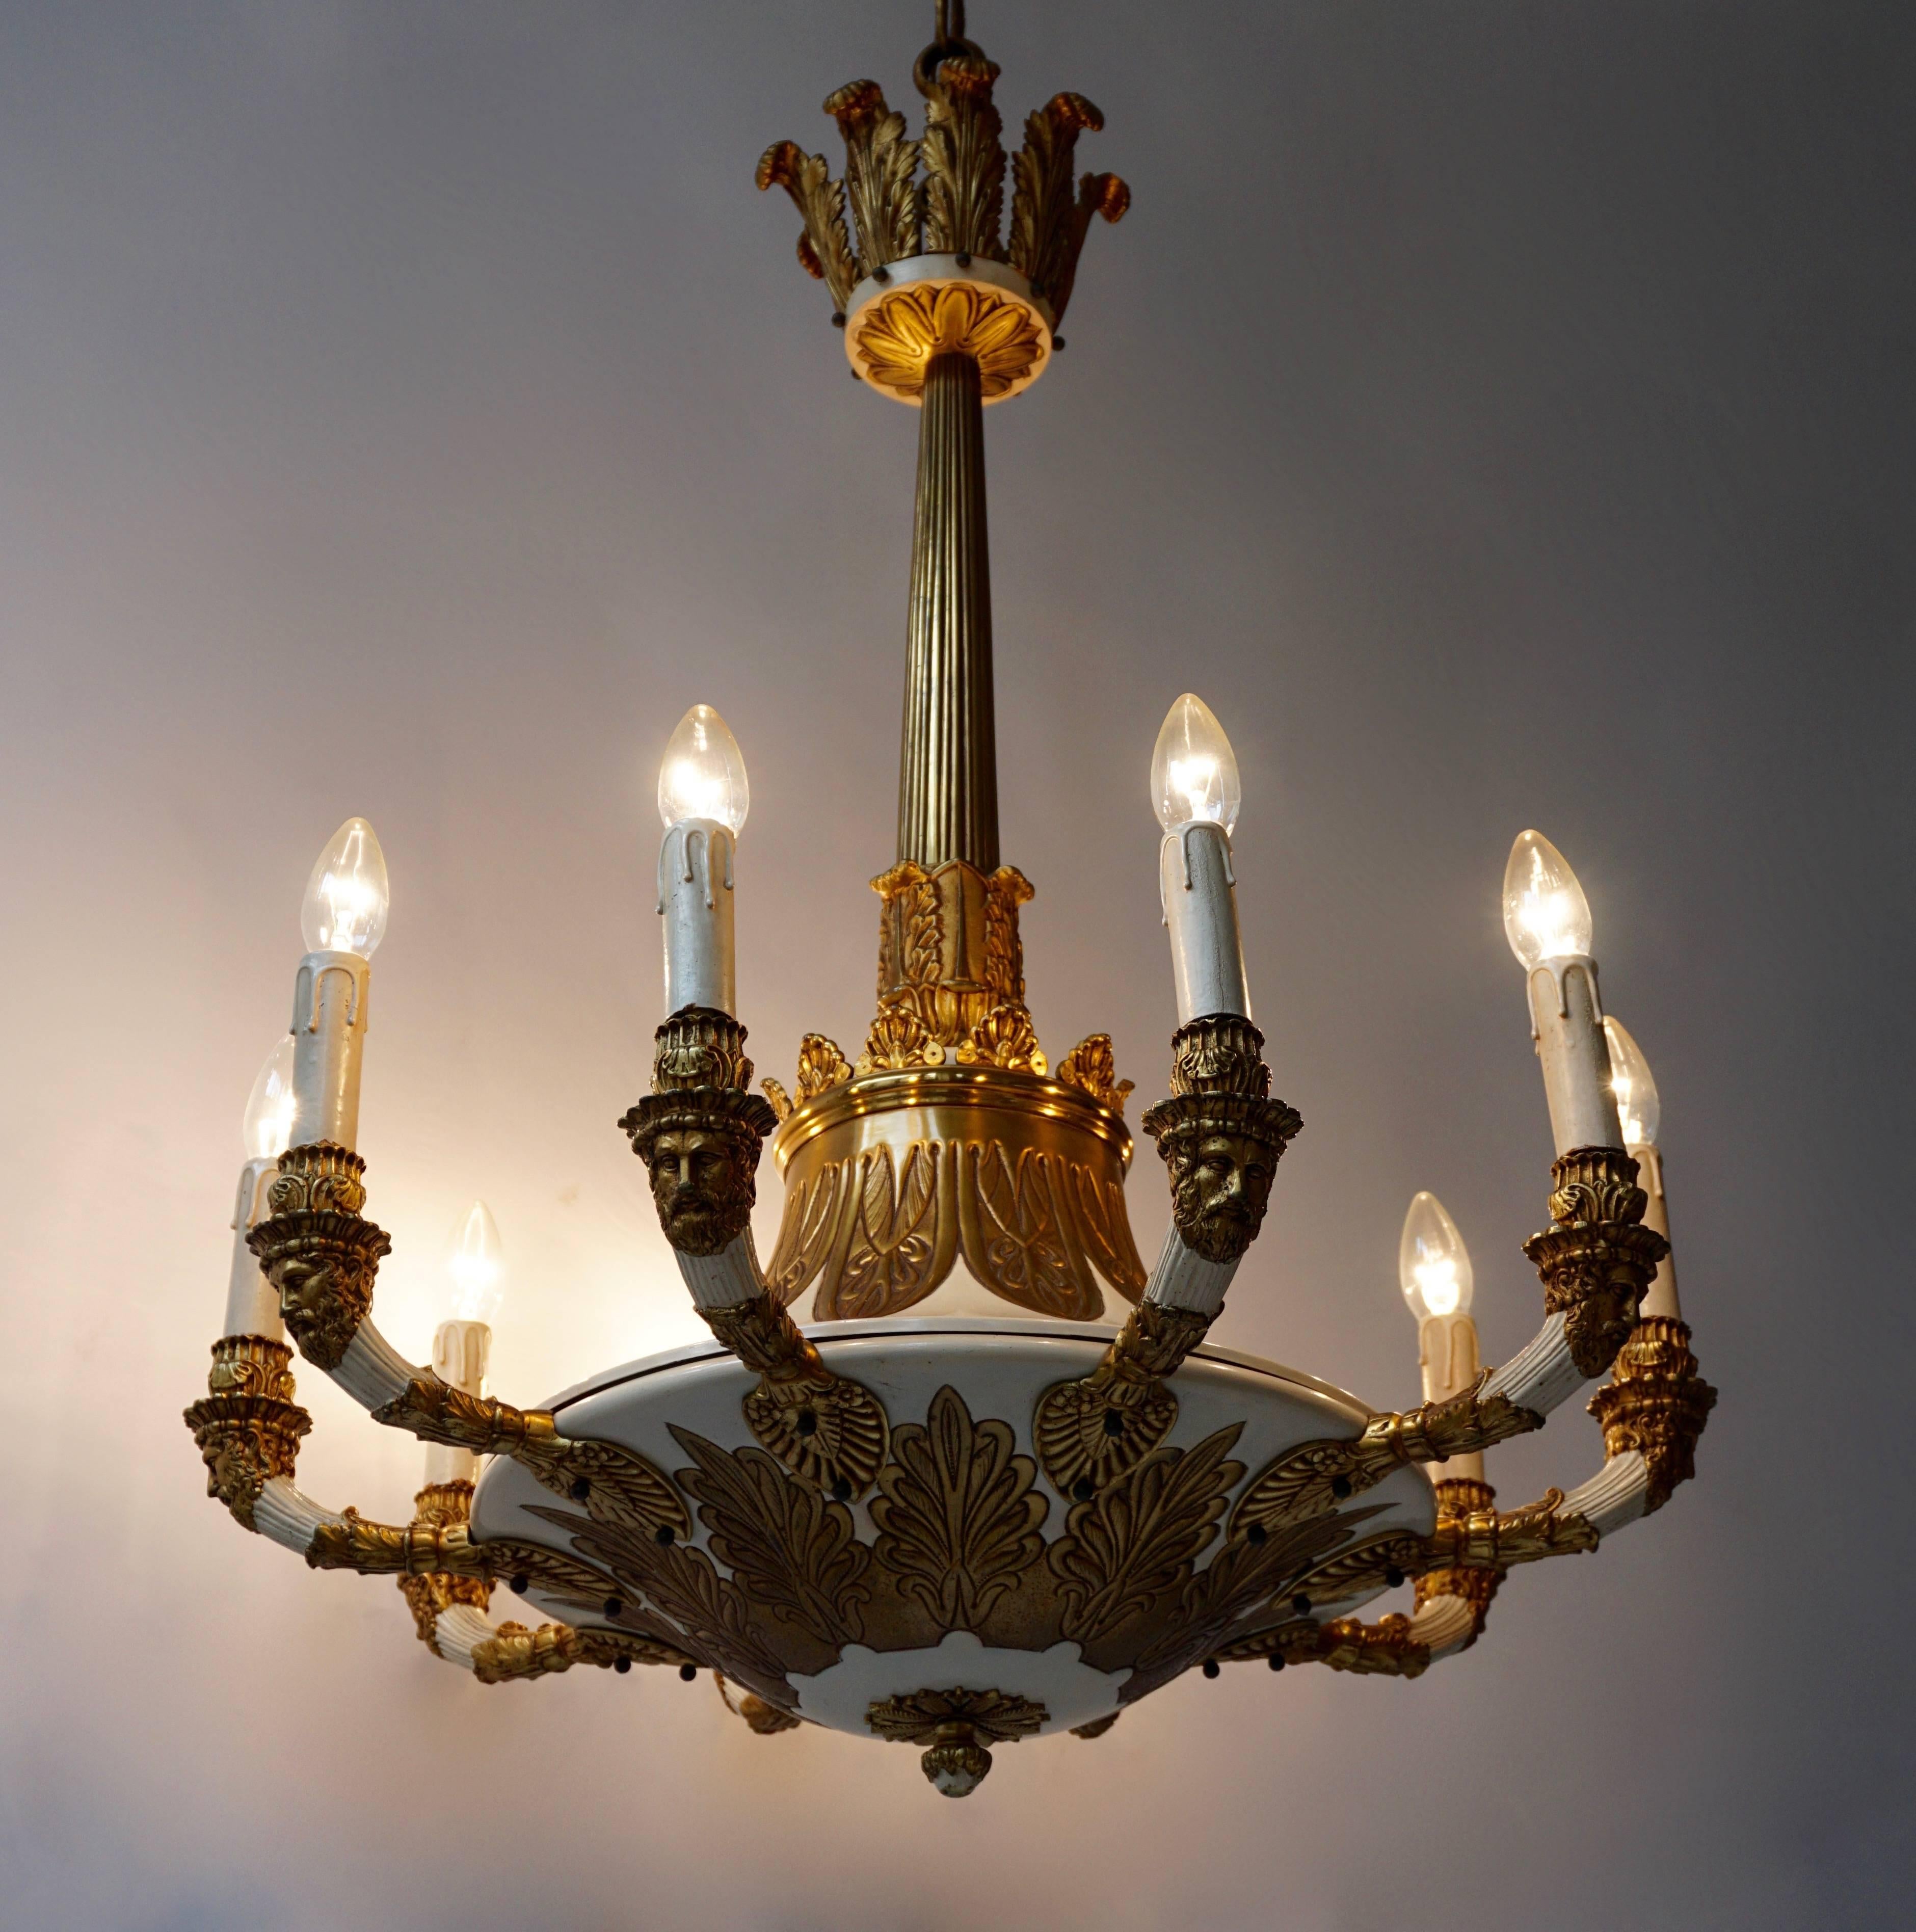 Spectacular bronze and painted ten arms chandelier.
Measures: Diameter 68 cm.
Height fixture 90 cm.
Total height with the chain is 135 cm.